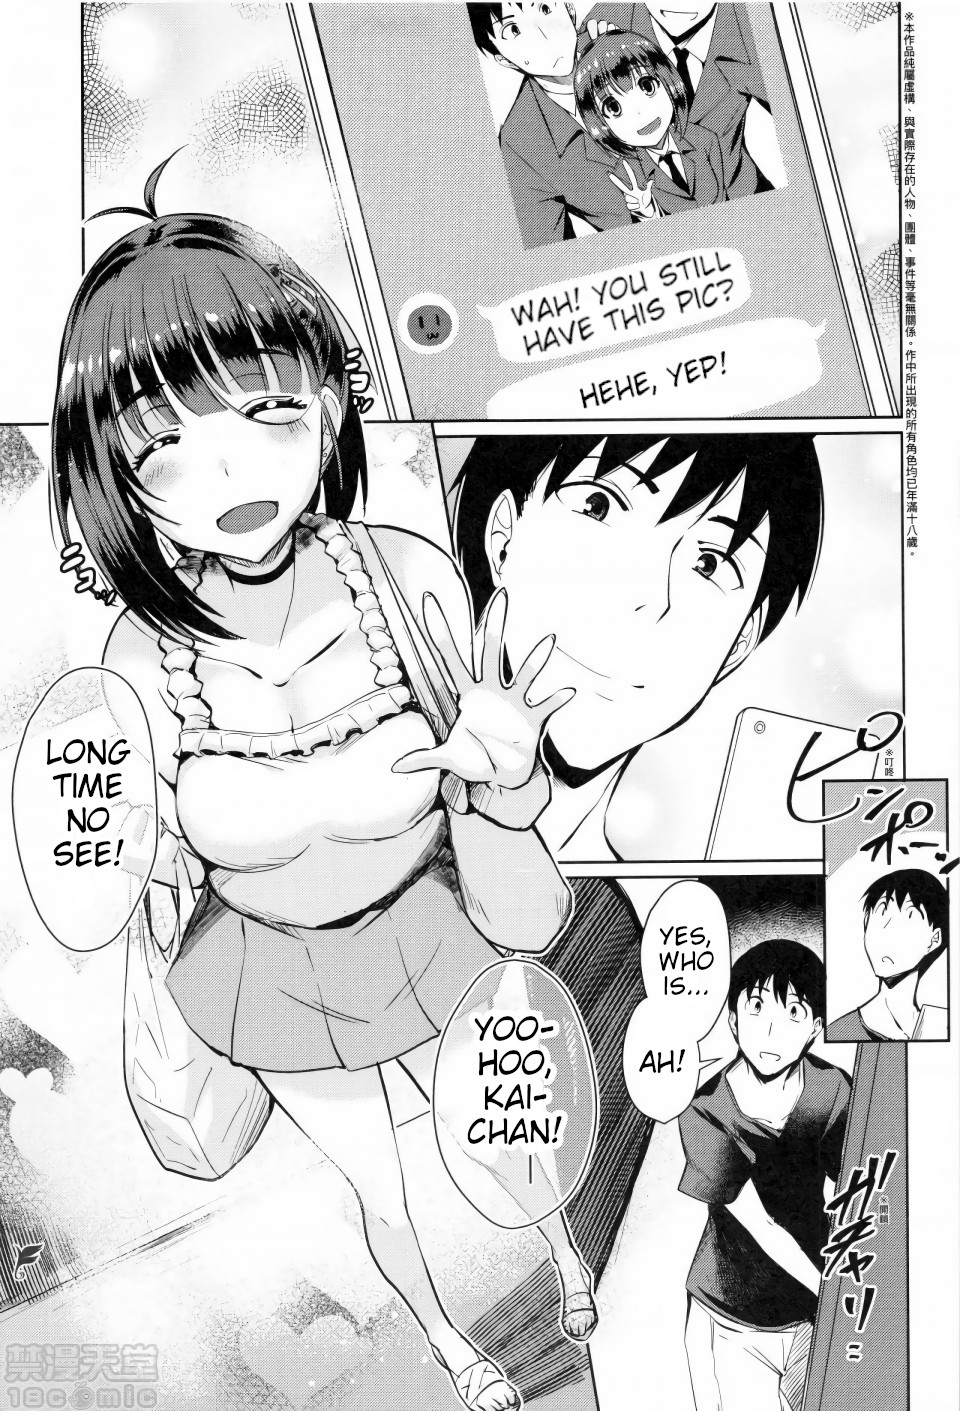 Hentai Manga Comic-Love That's Changed Forever-Read-1